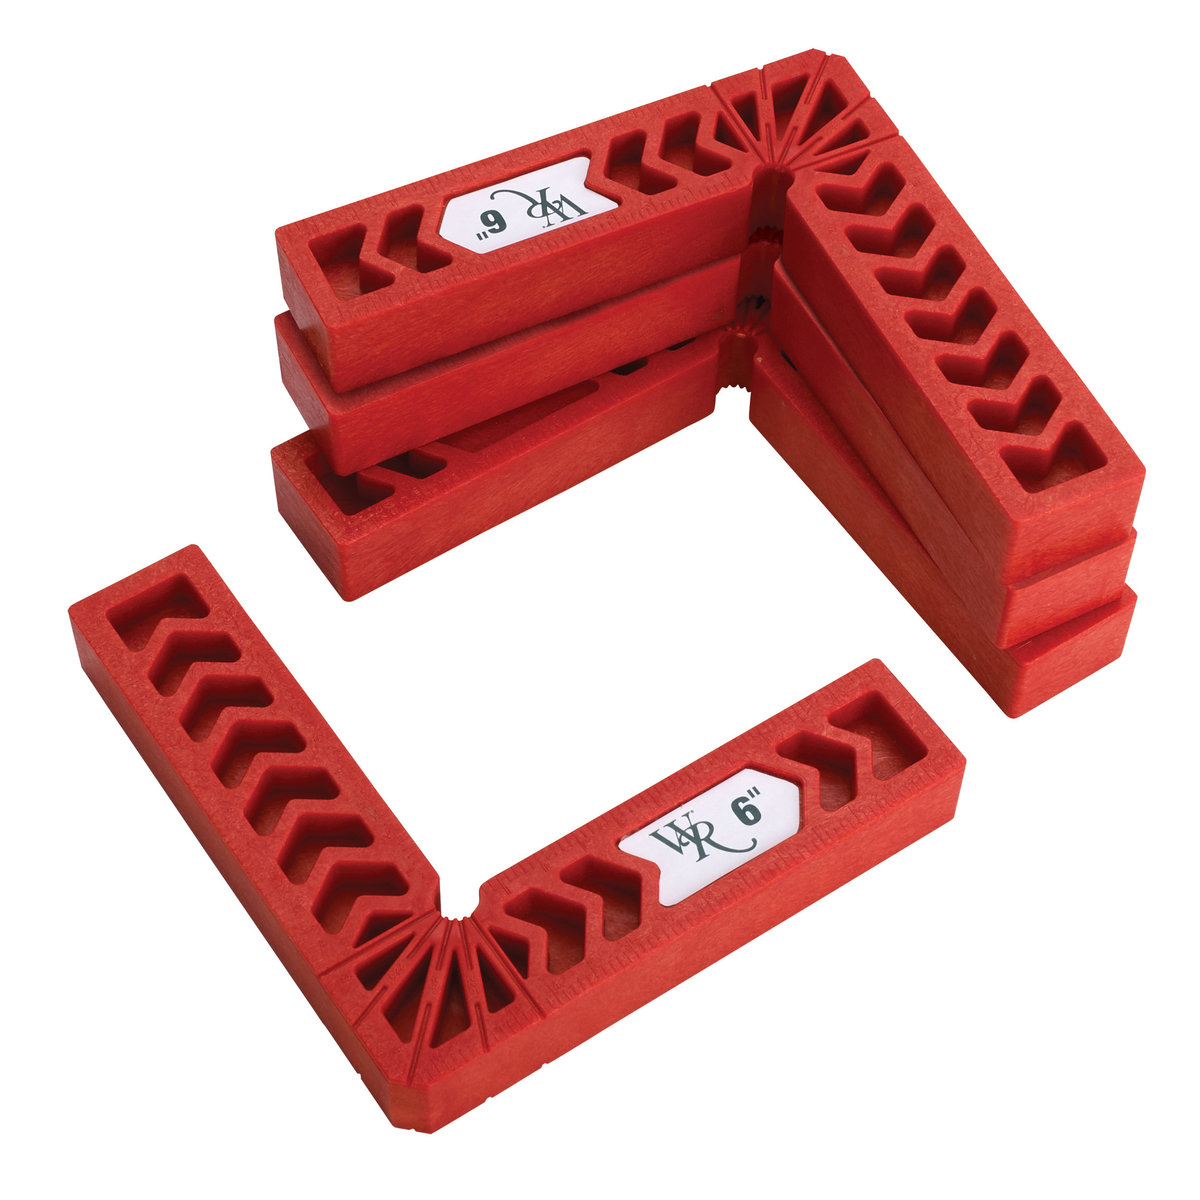 New!! Clamping Square version available 